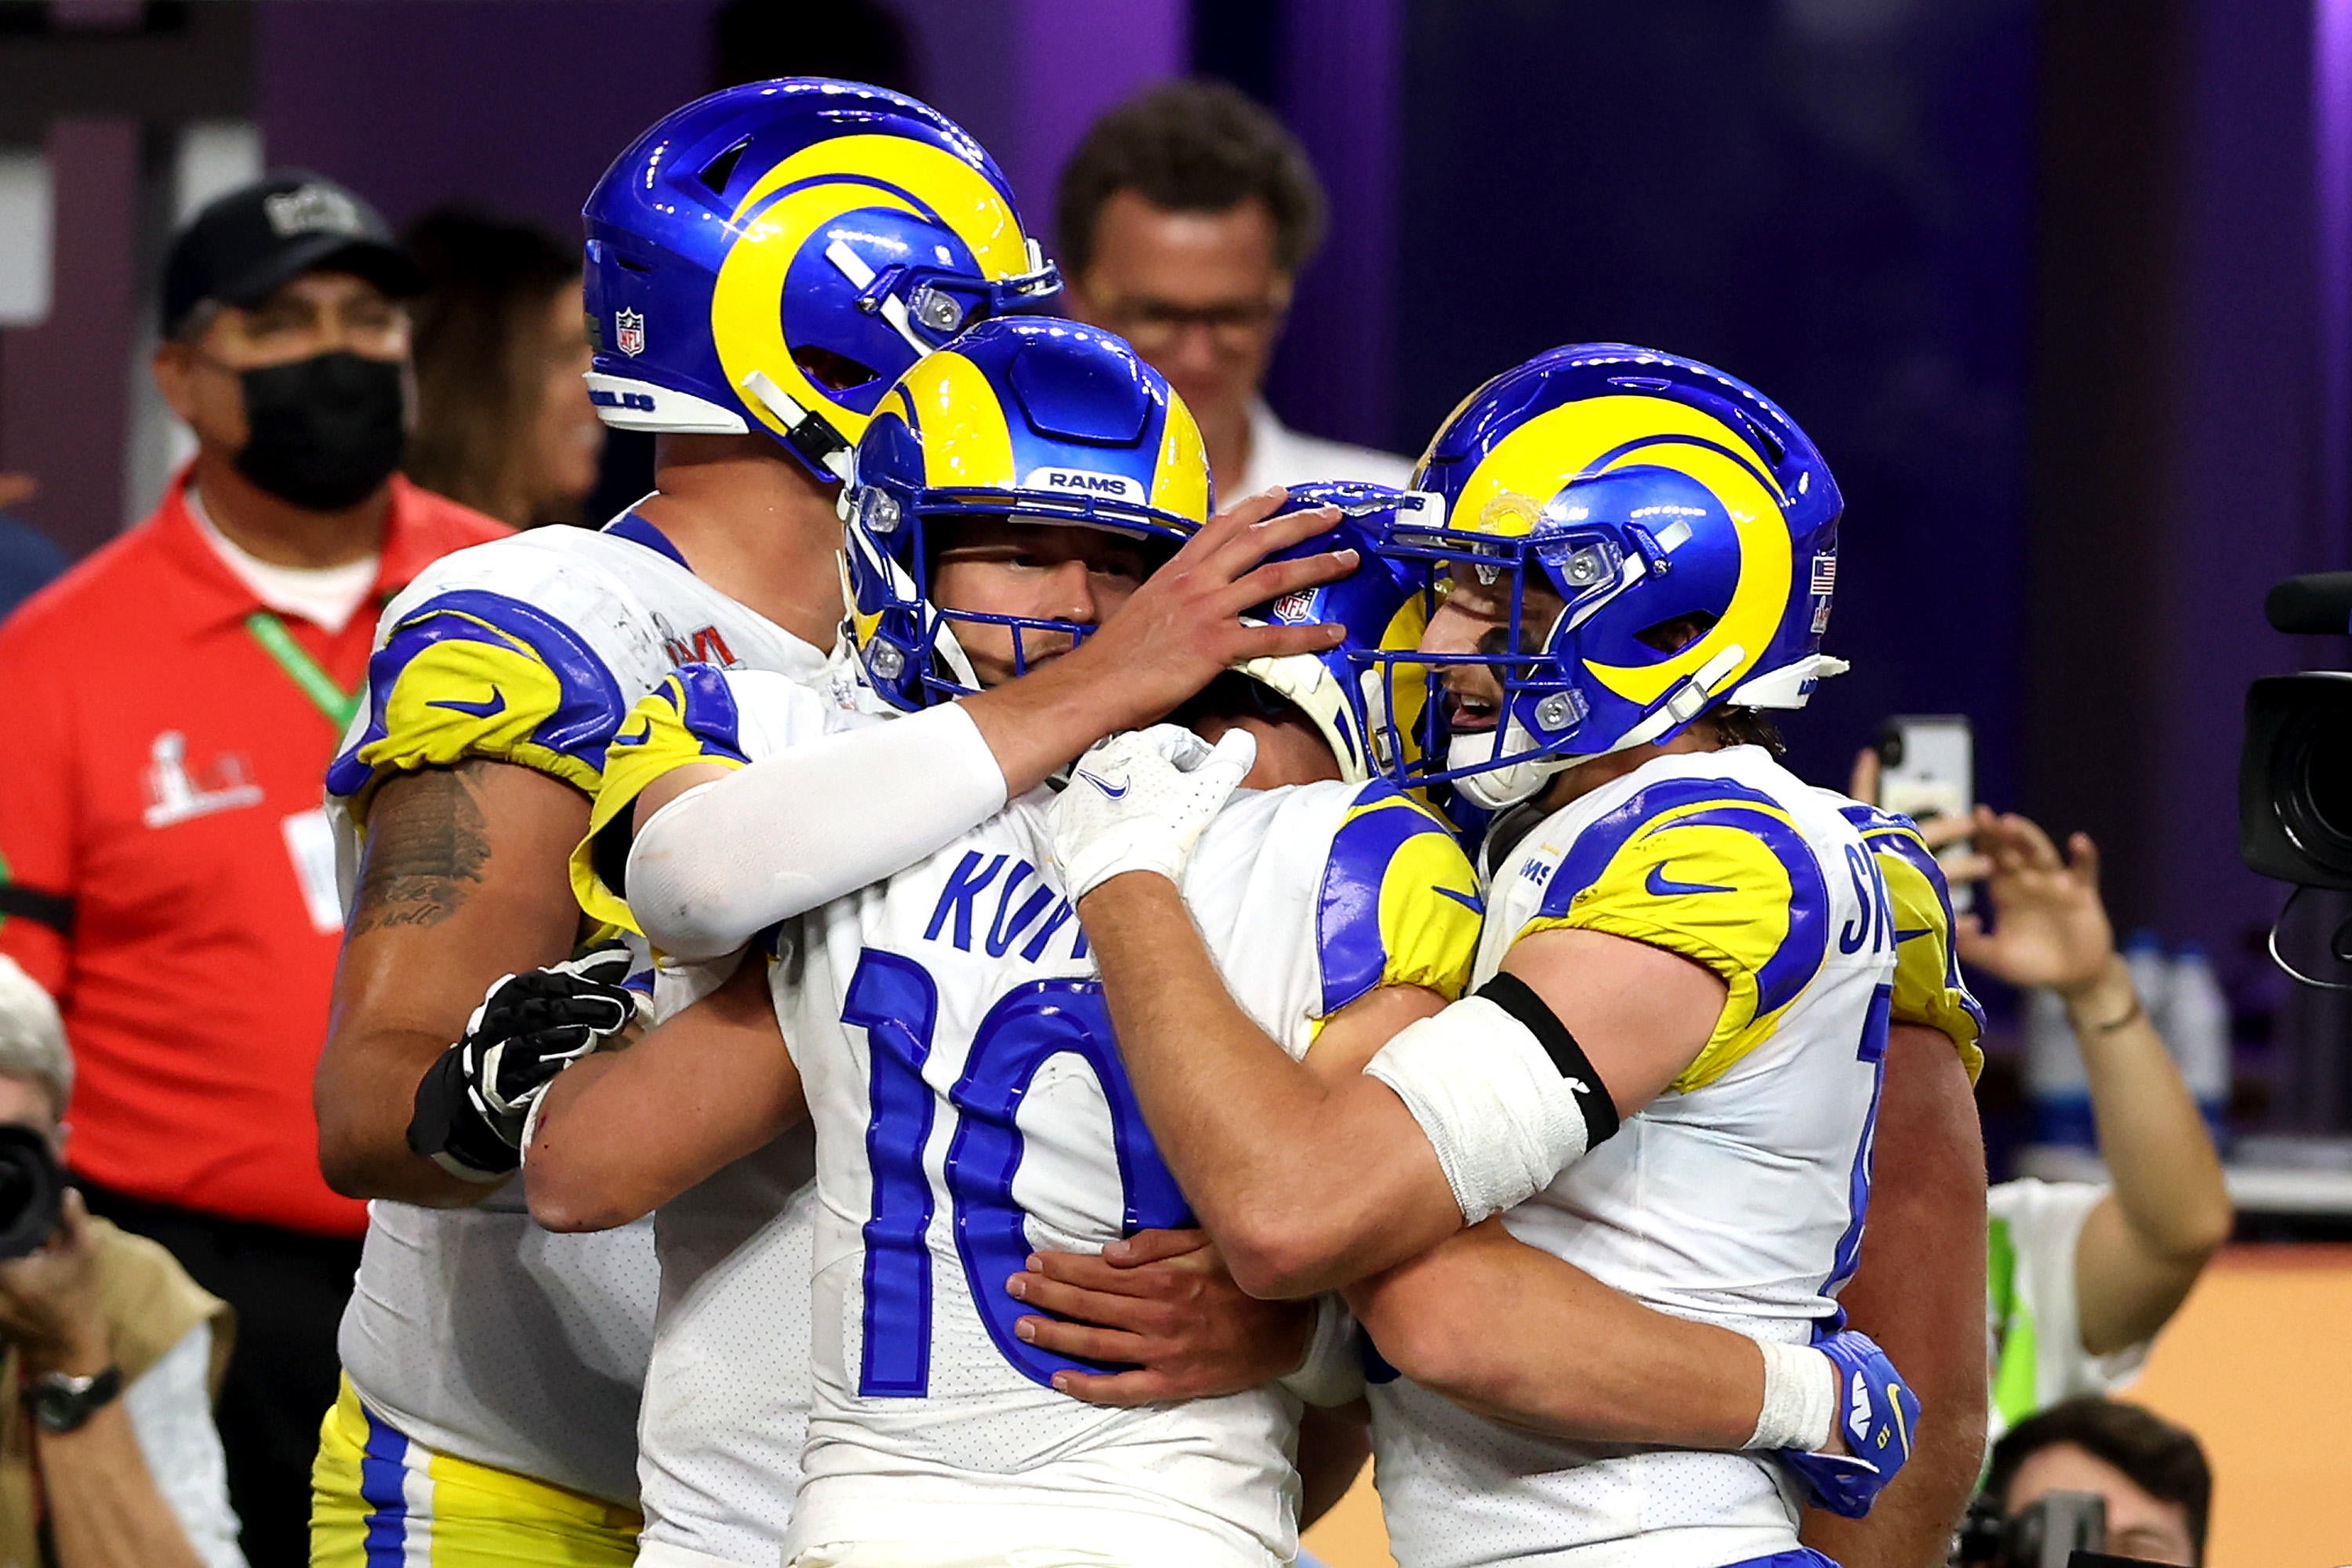 Rams score in Super Bowl 2022: L.A. claims franchise's second